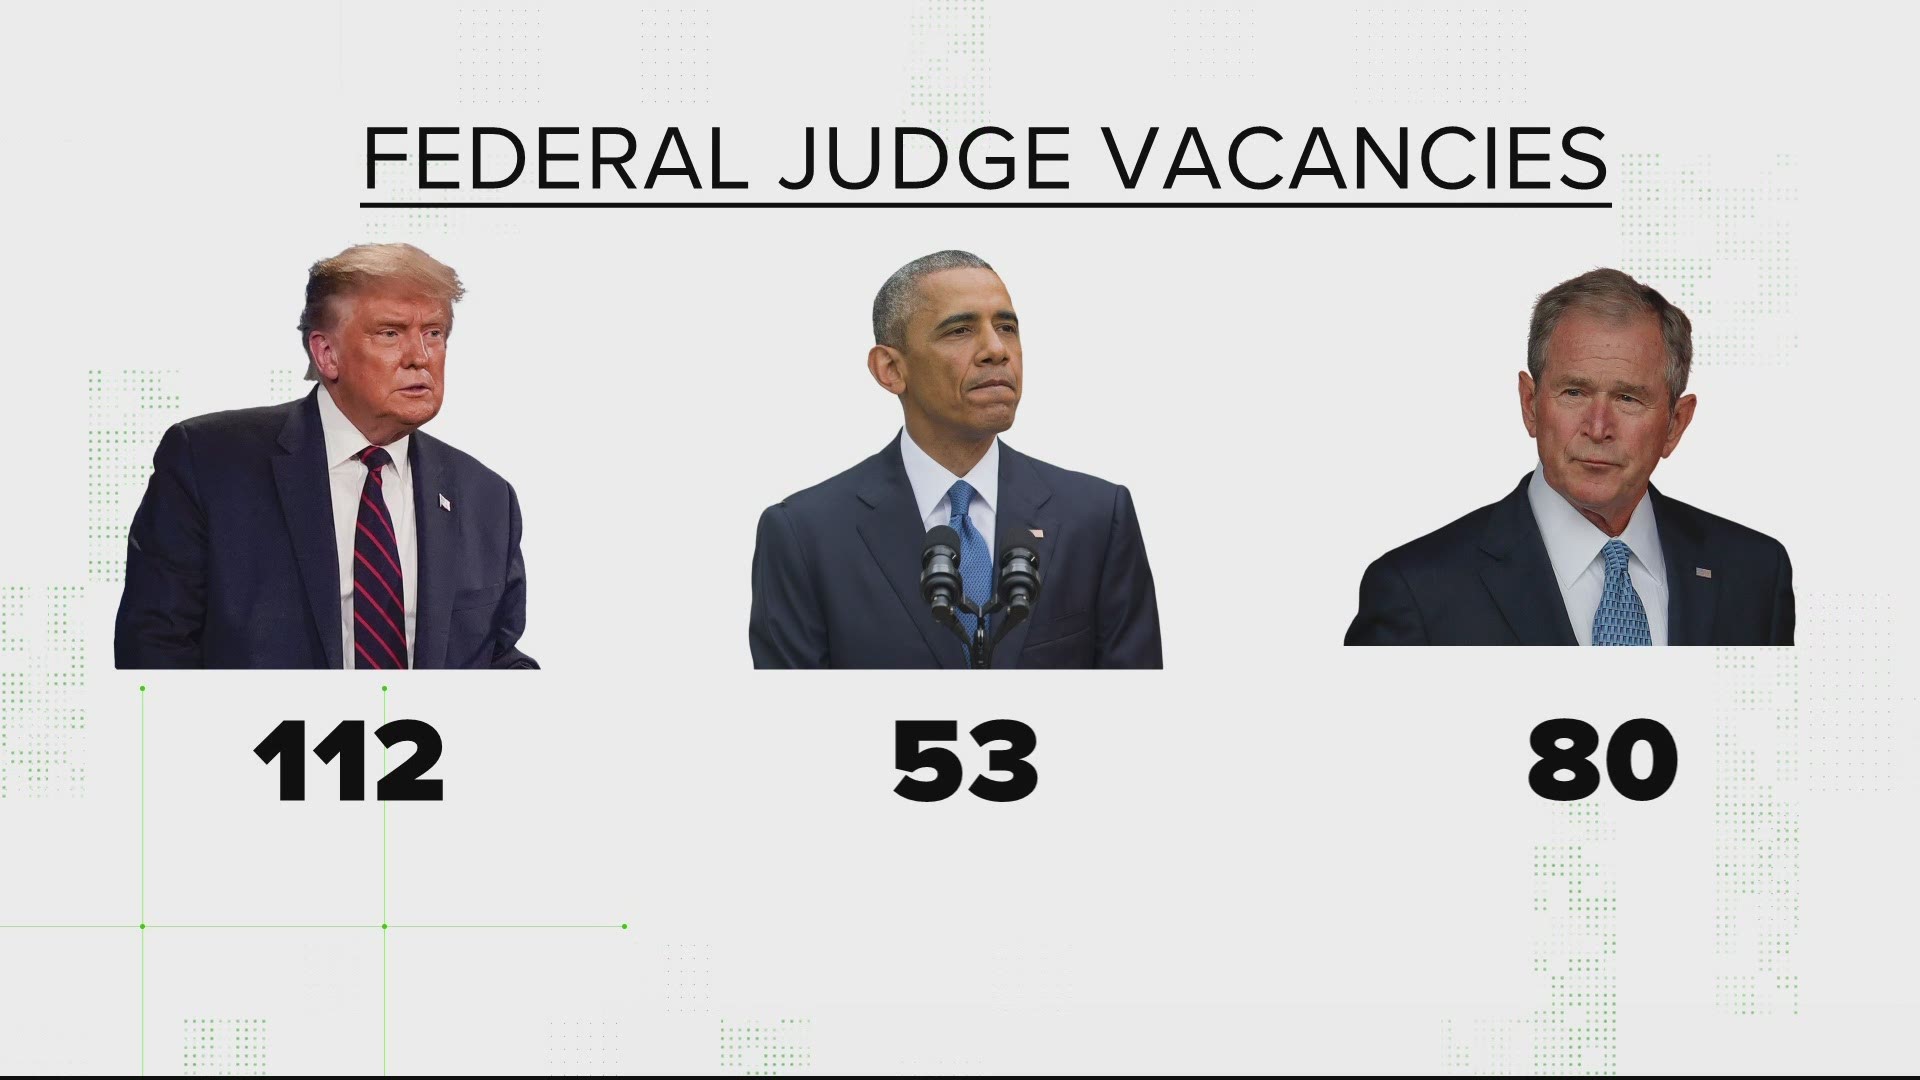 President Trump got the number wrong, but the number of federal judge vacancies was still significantly higher than previous administrations.